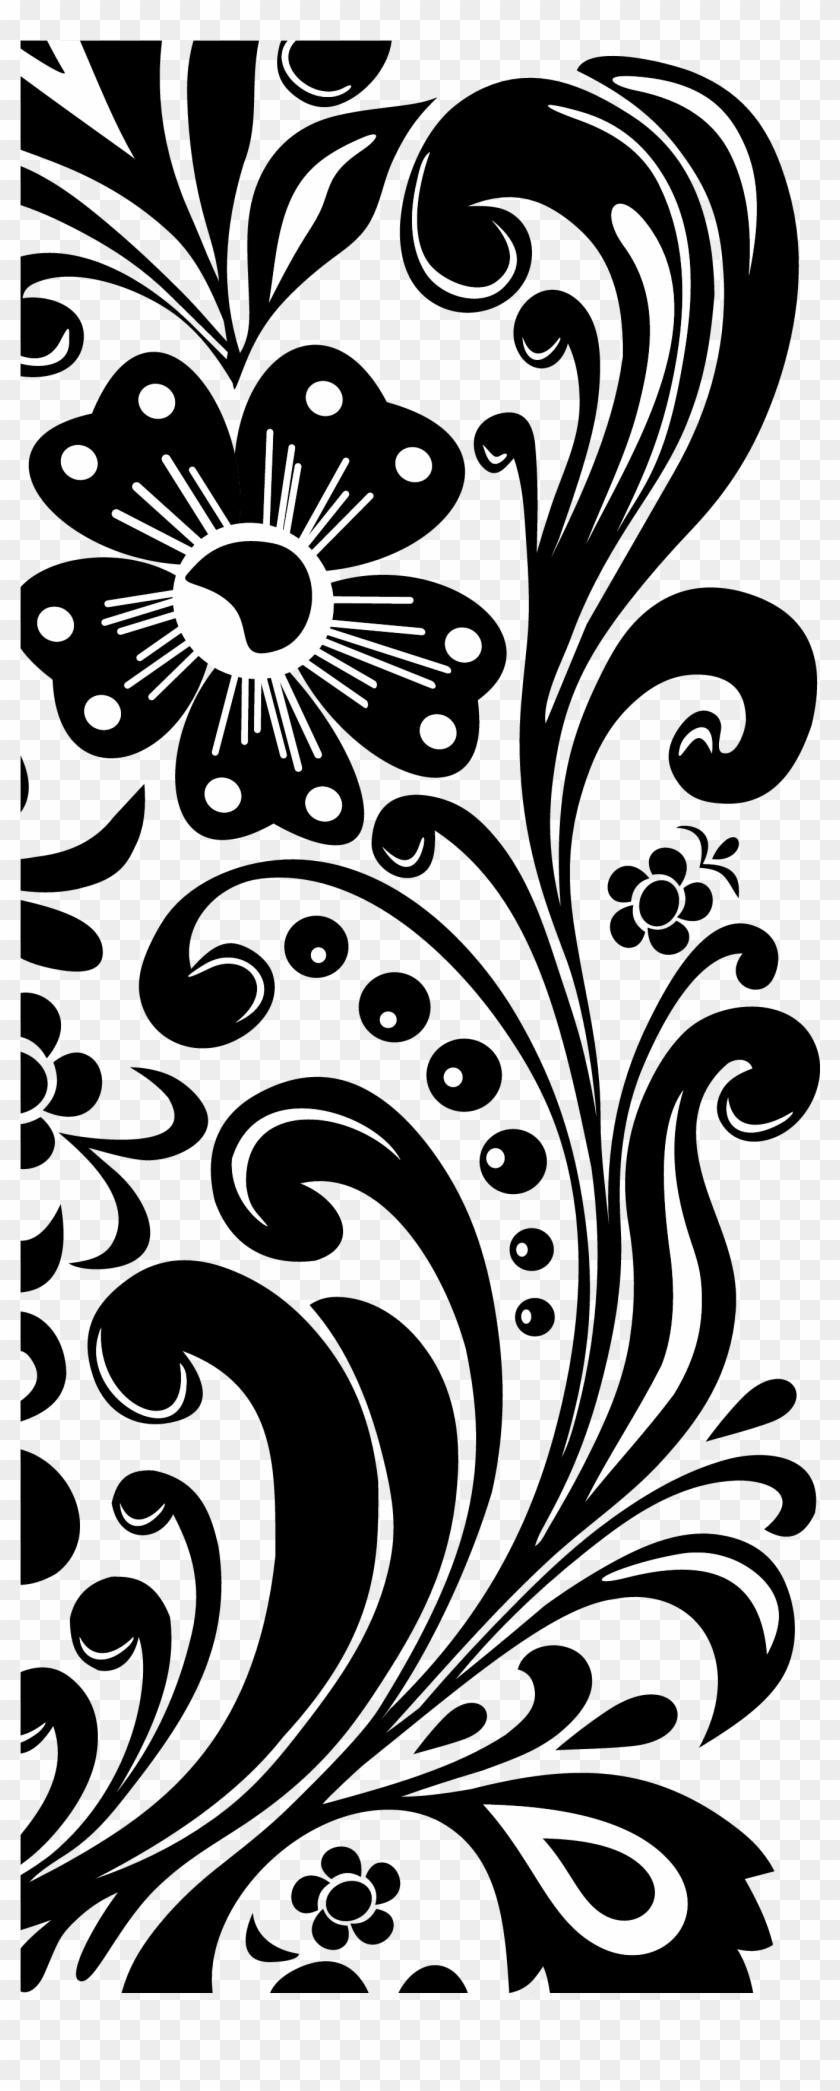 Index Of /hp - Flowers Border Line Art Clipart #416738